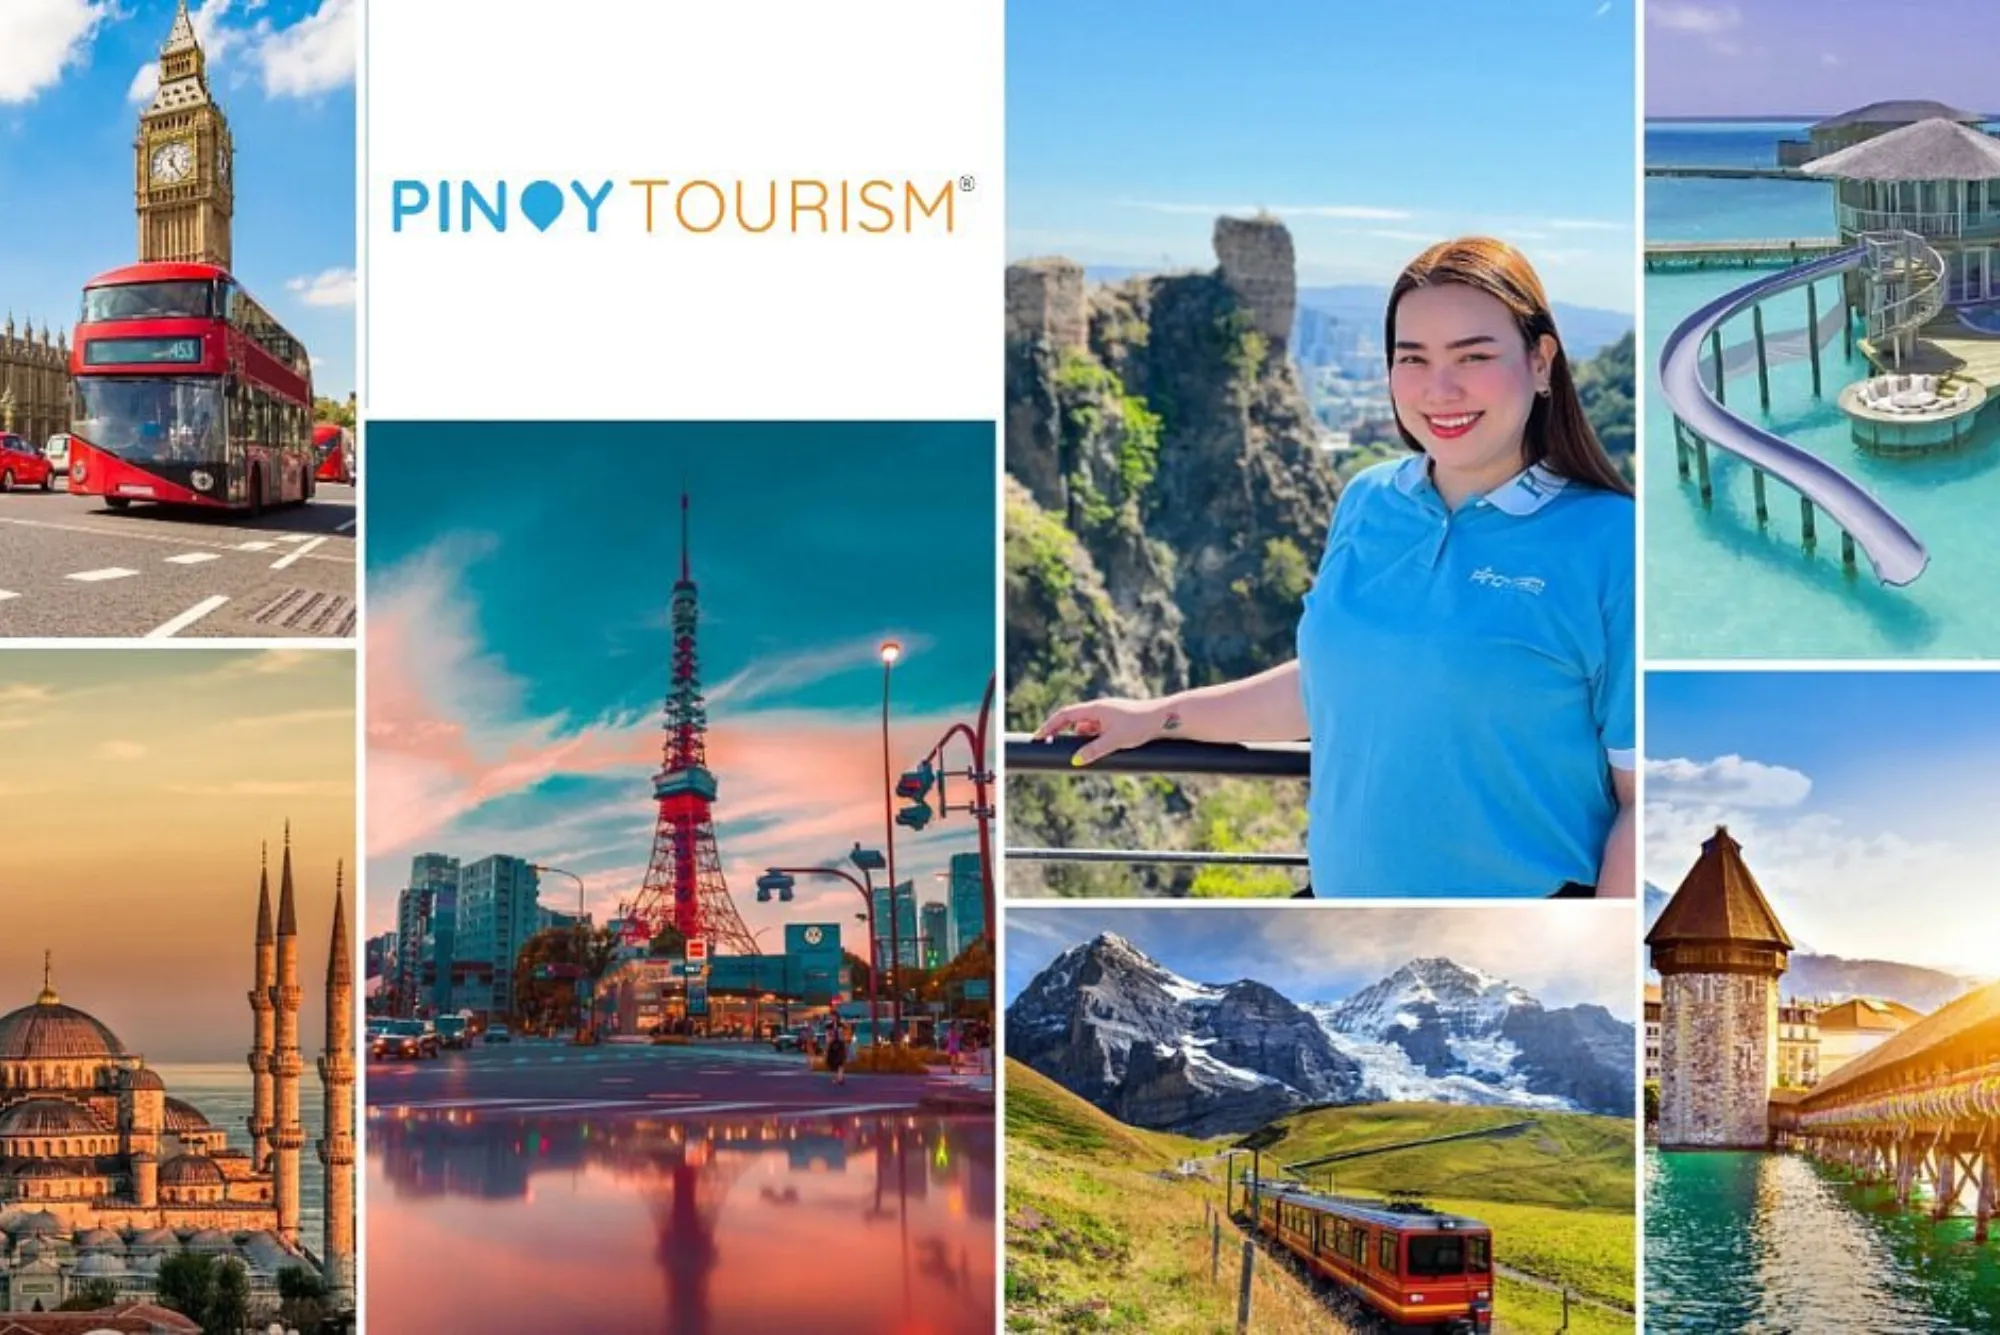 Pinoy Tourism and Travel